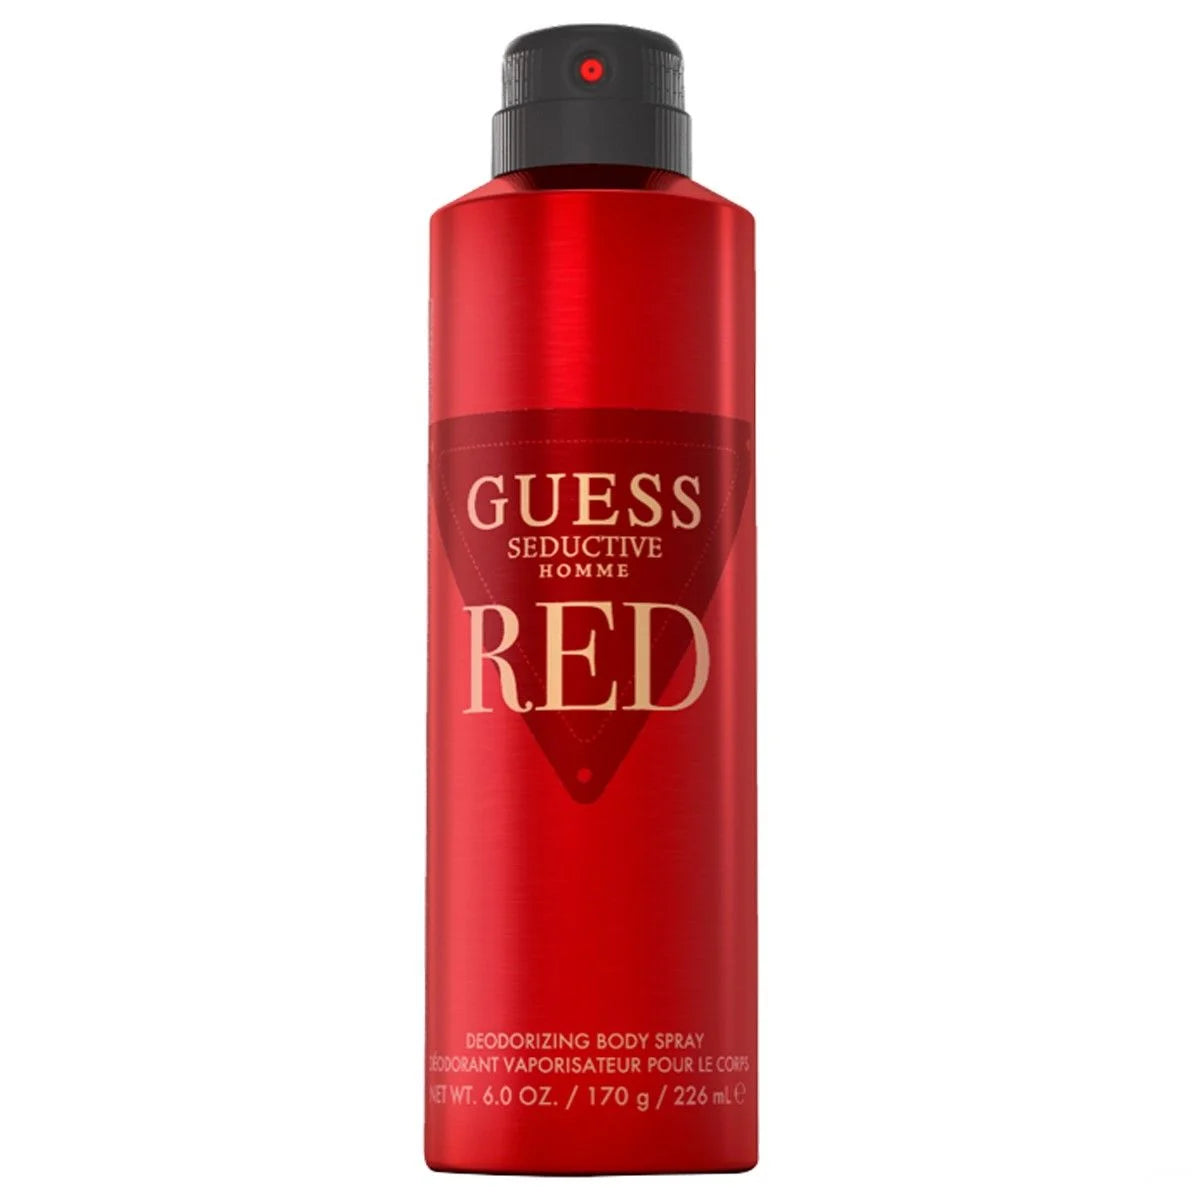 Guess Seductive Homme Red 170g Deodorant Spray